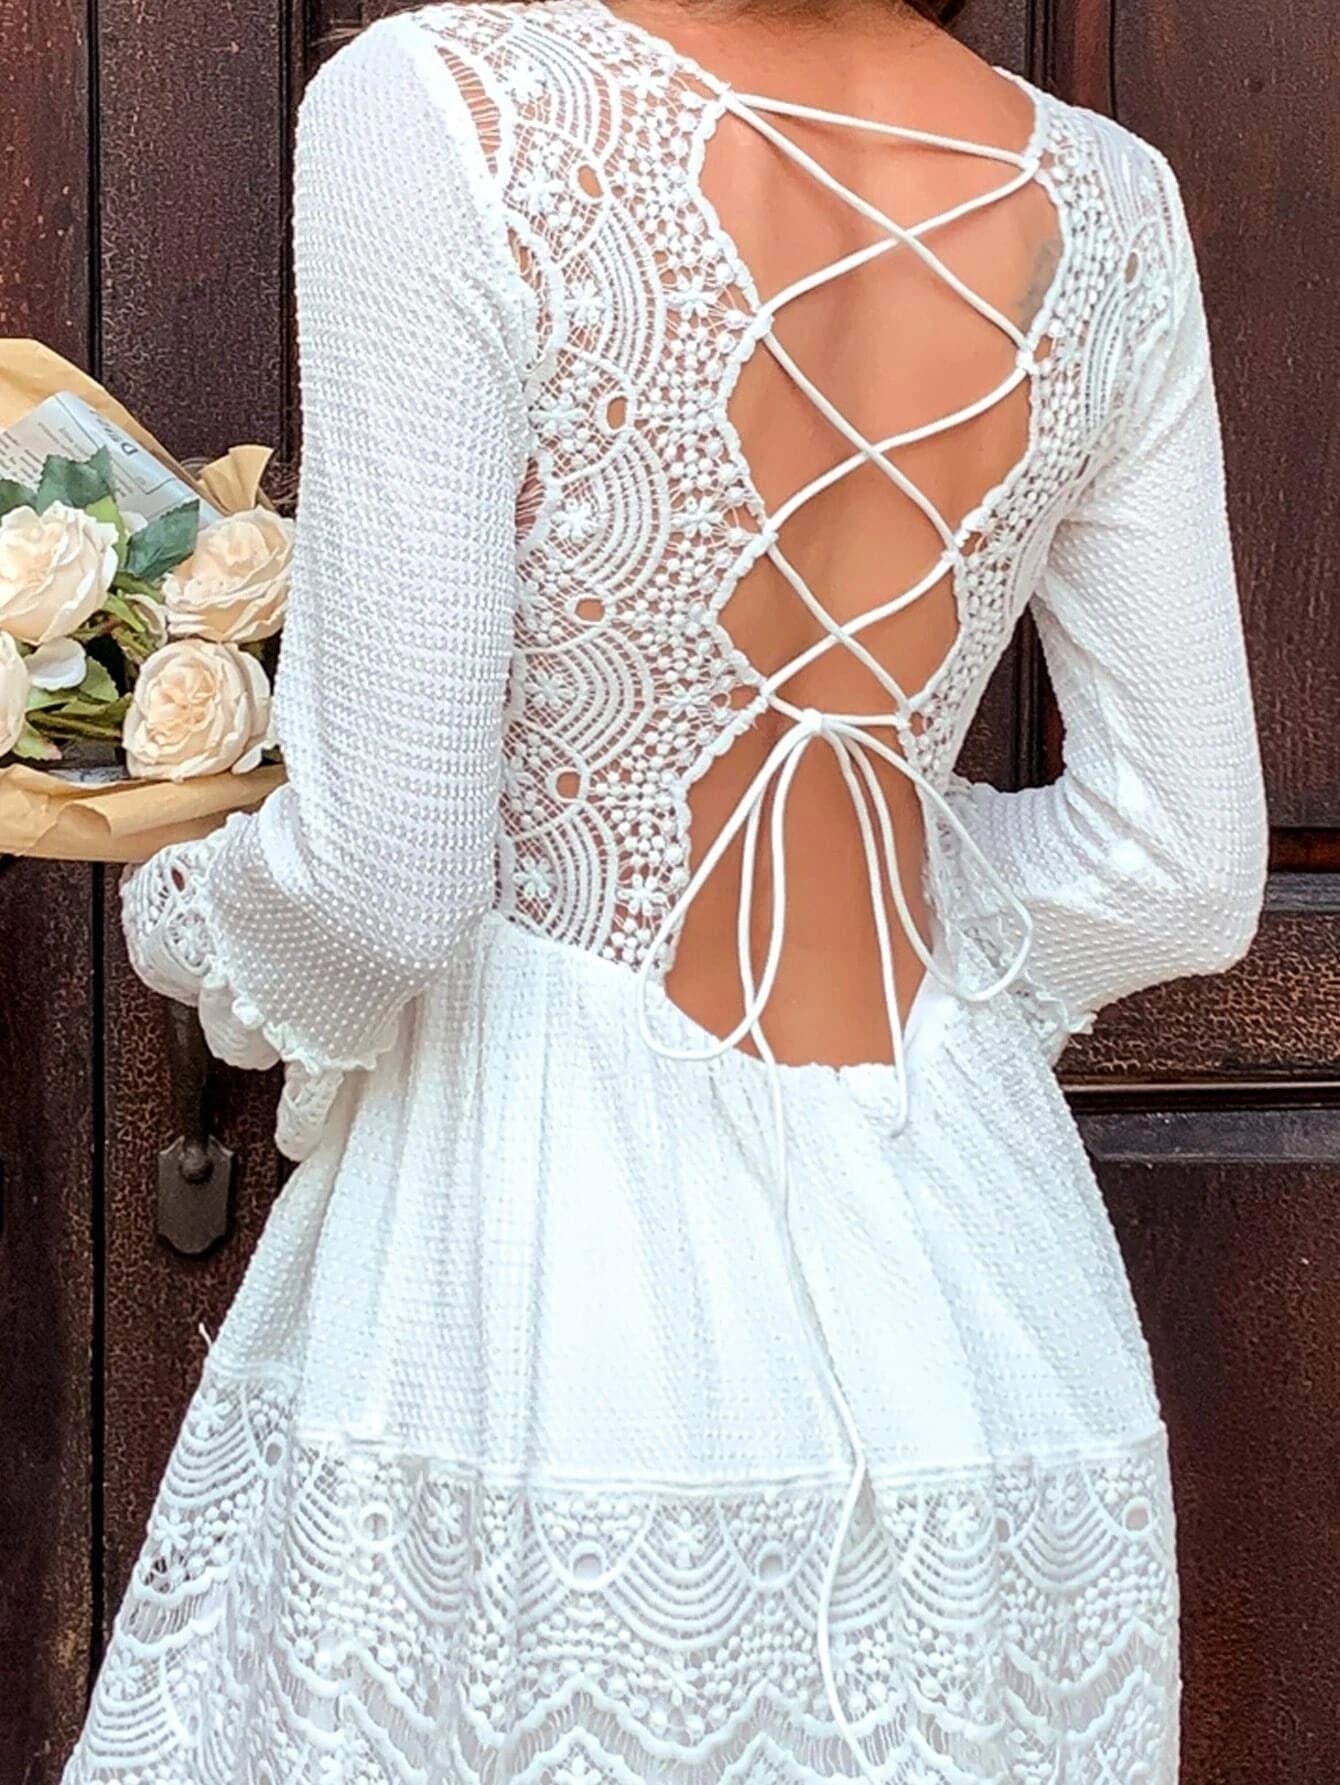 MISSORD Elegant Sexy Lace Flare Sleeve Backless Dress FT8251